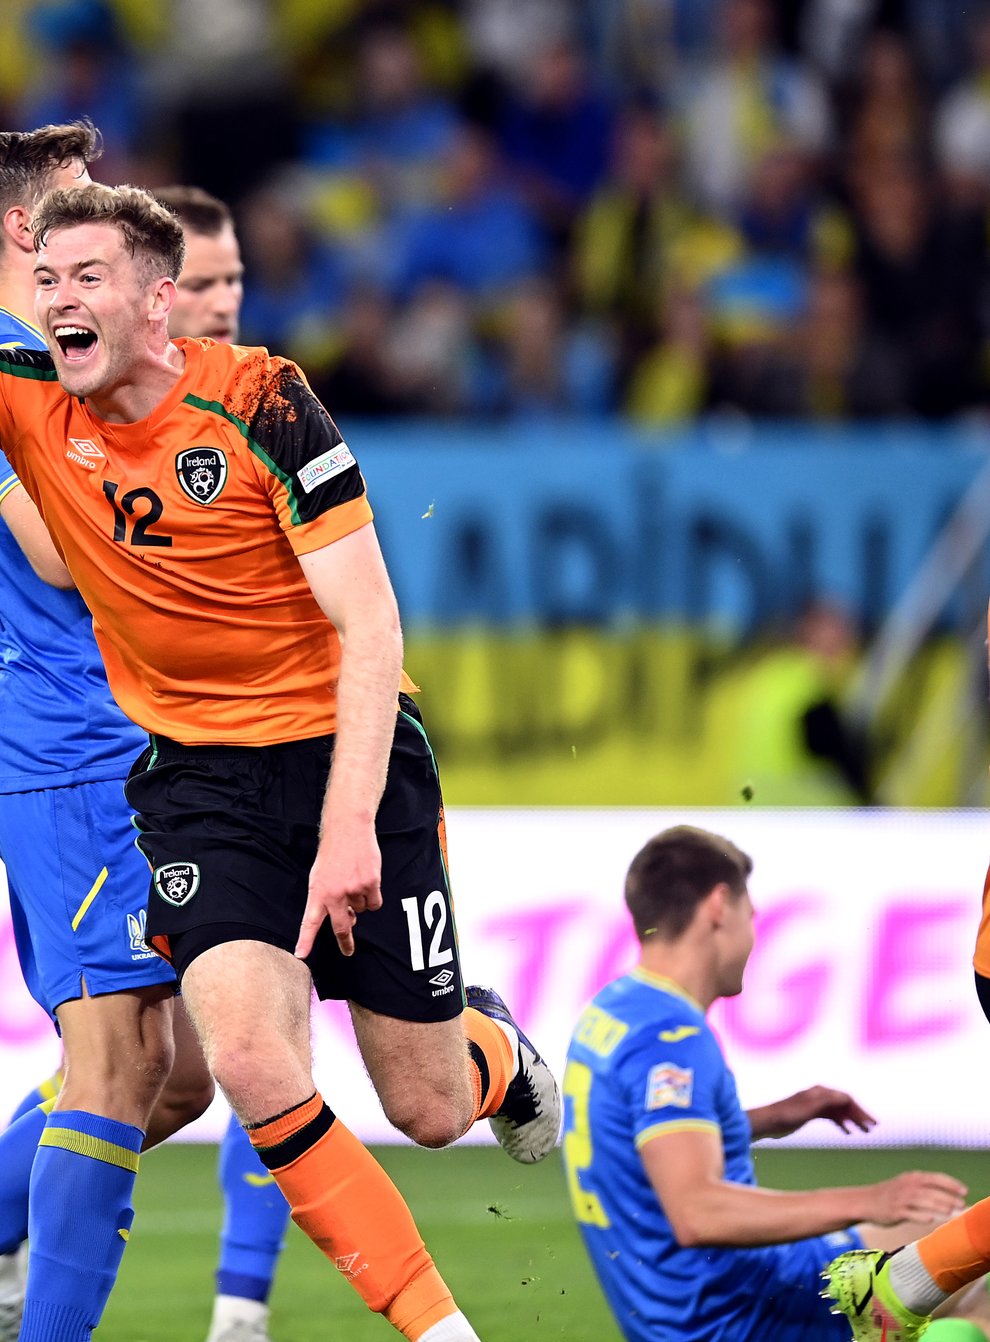 Republic of Ireland defender Nathan Collins scored a stunning solo goal against Ukraine (Rafal Oleksiewicz/PA)